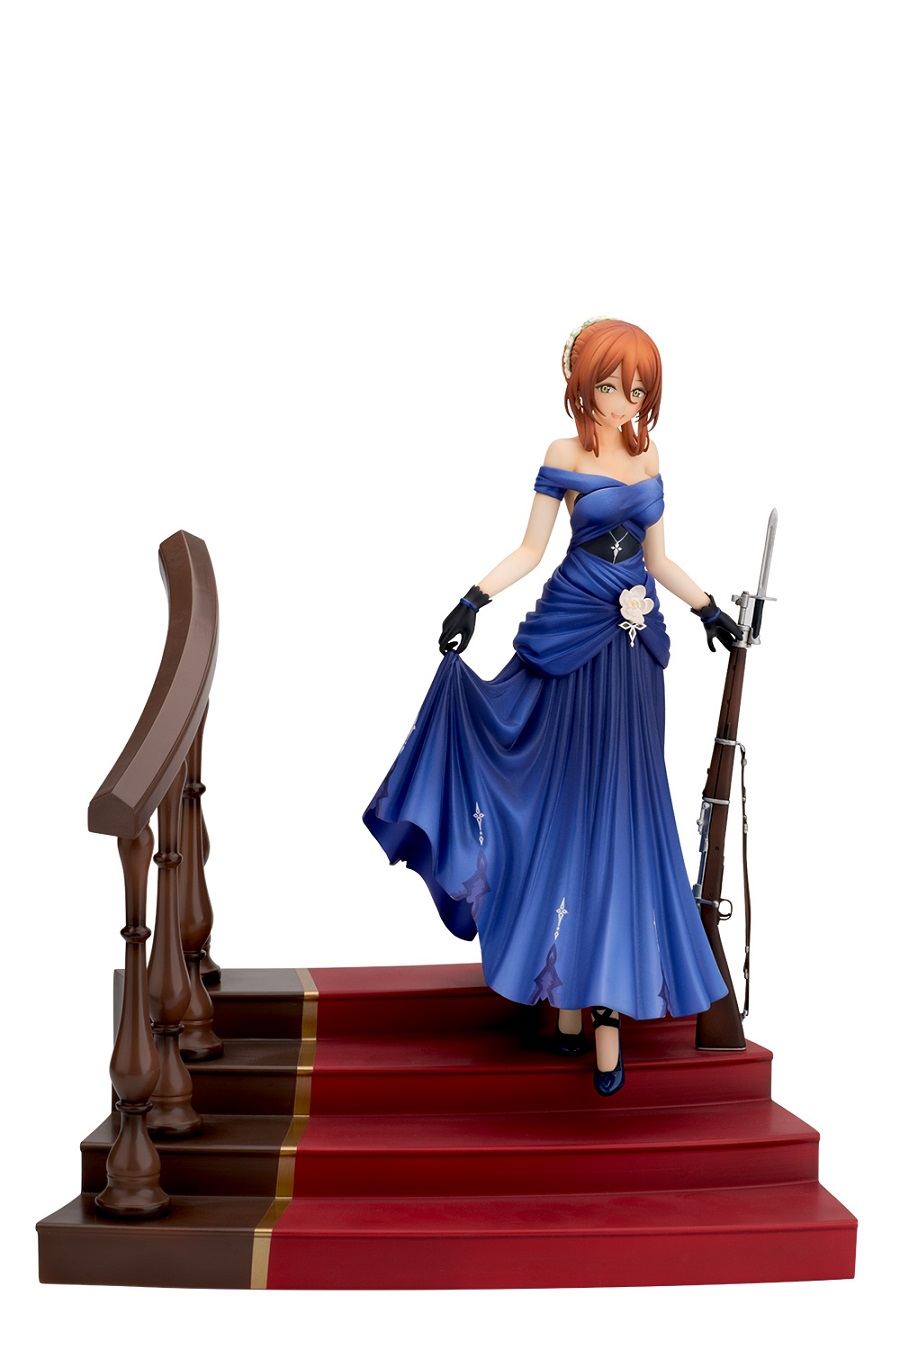 GIRLS' FRONTLINE 1/8 SCALE PRE-PAINTED FIGURE: SPRINGFIELD QUEEN UNDER THE GLIM VER. Hobbymax